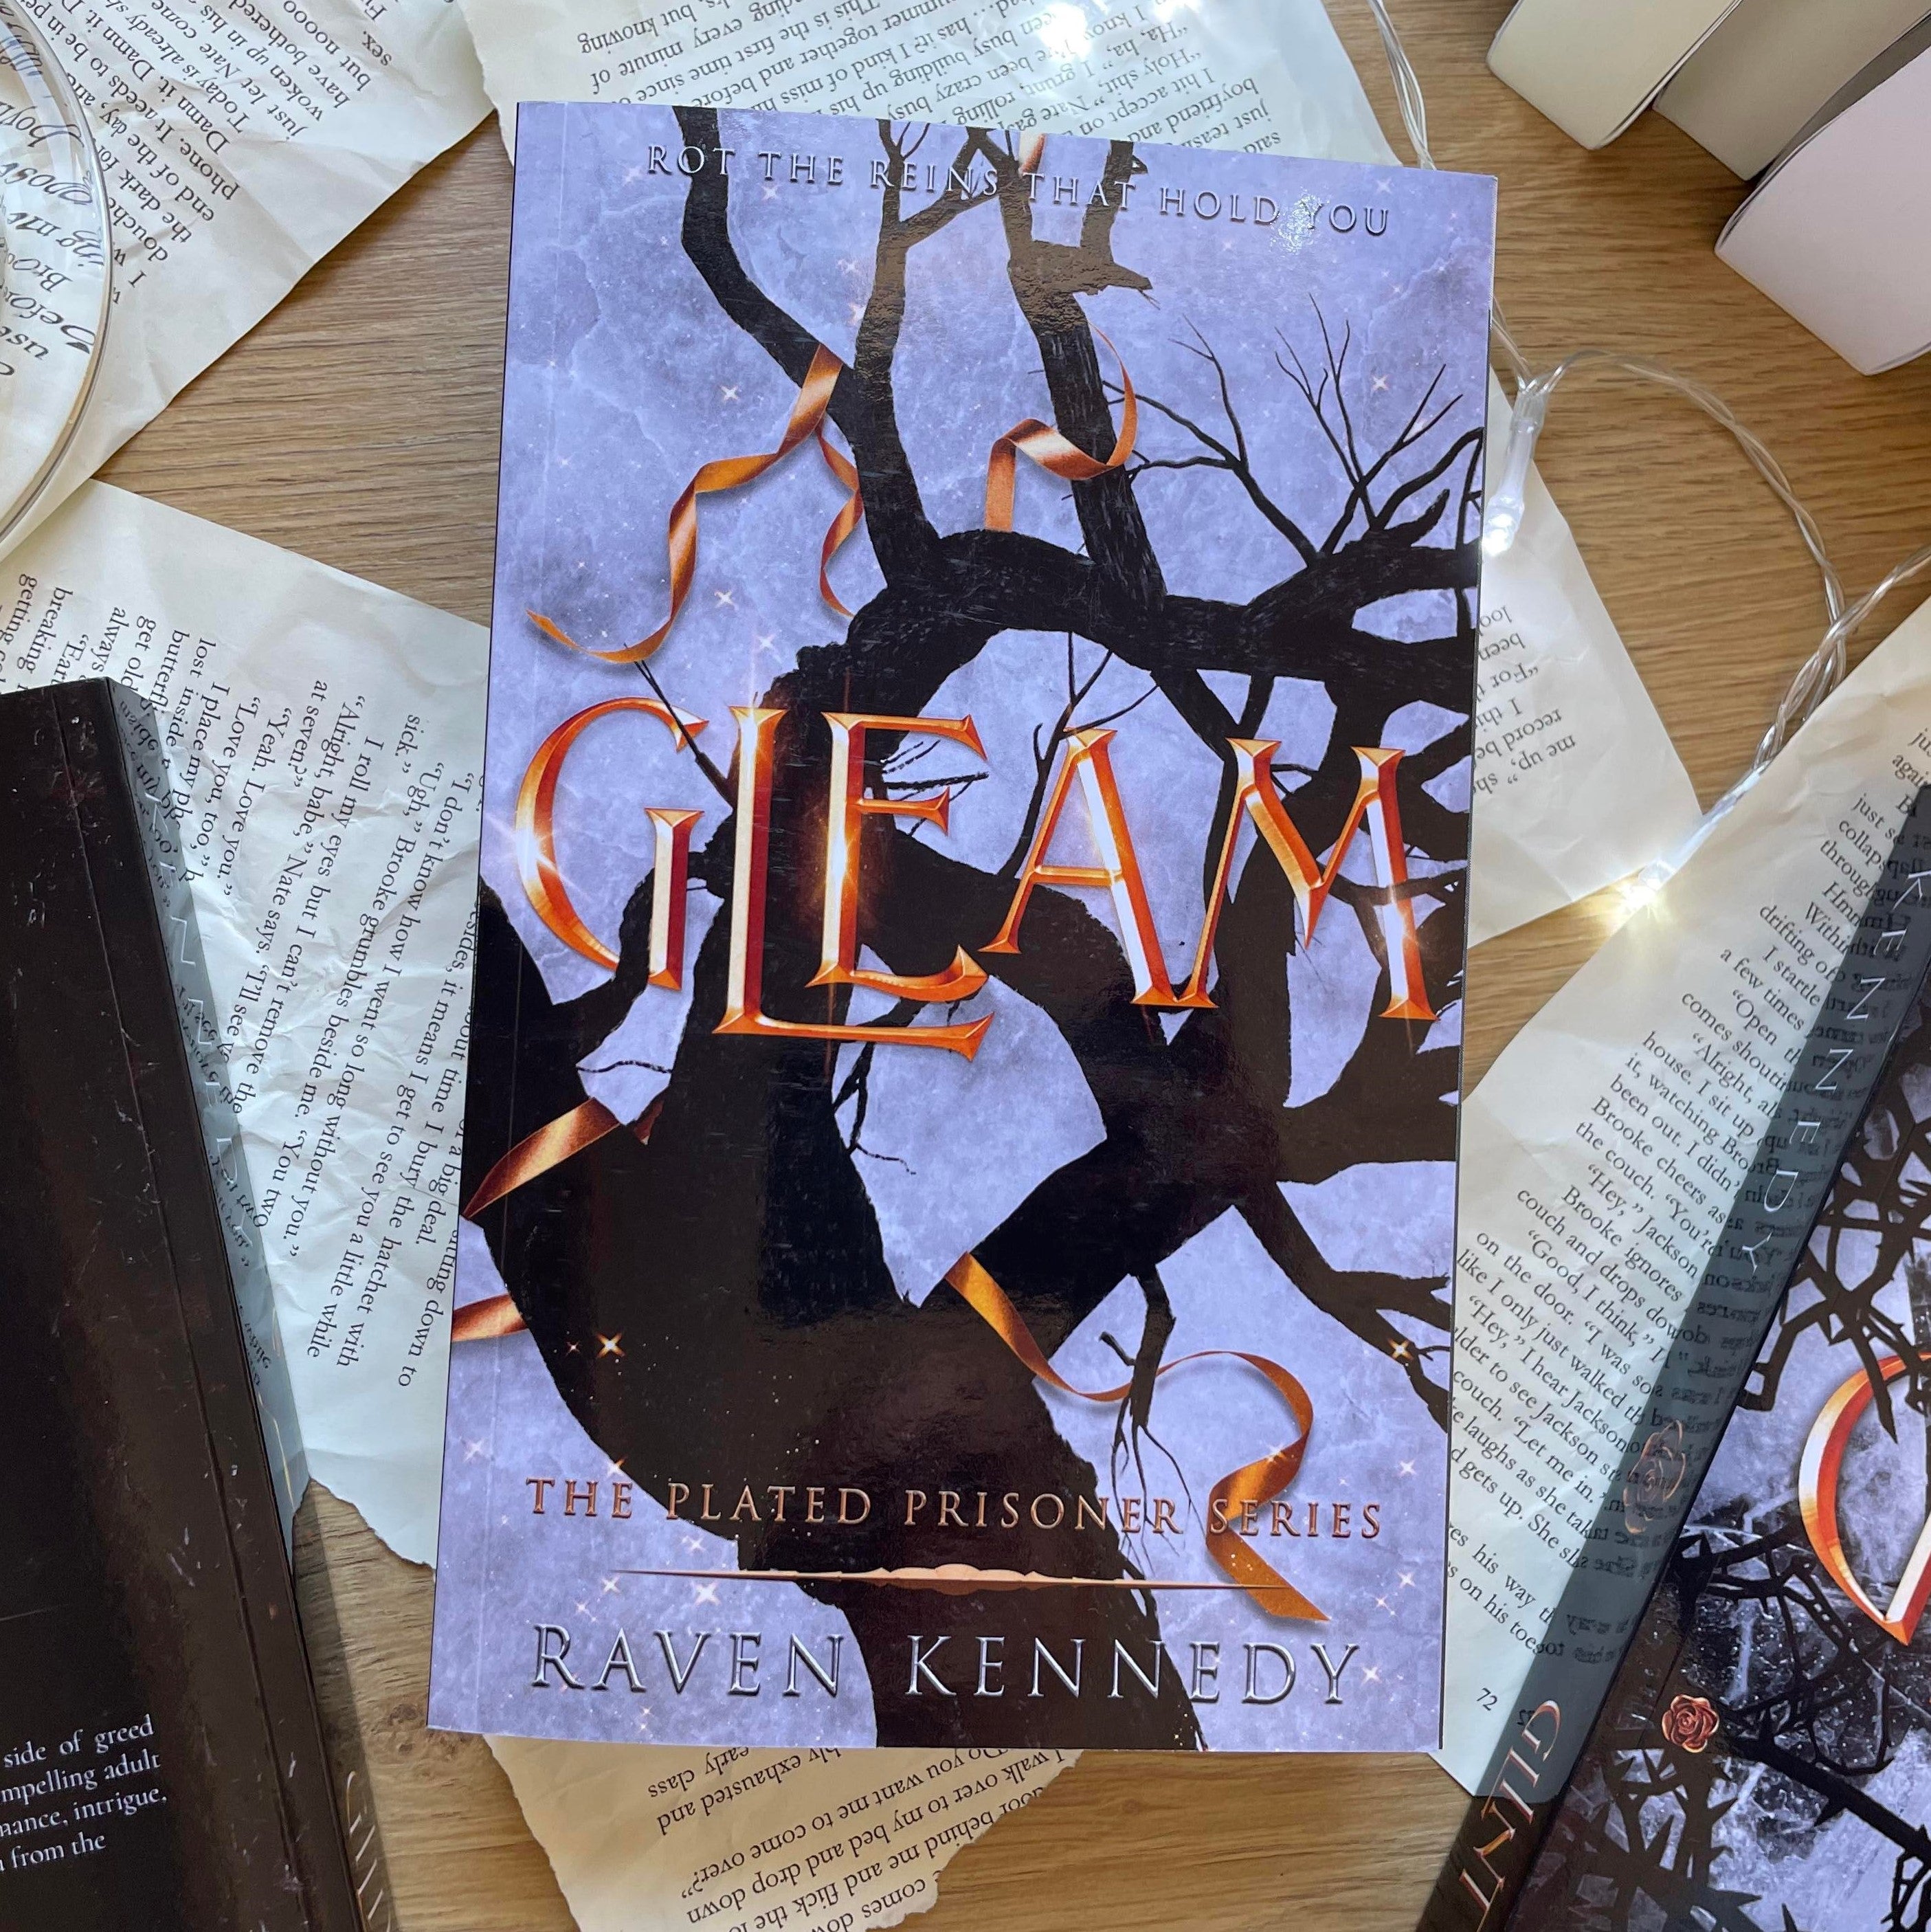 The Plated Prisoner series by Raven Kennedy